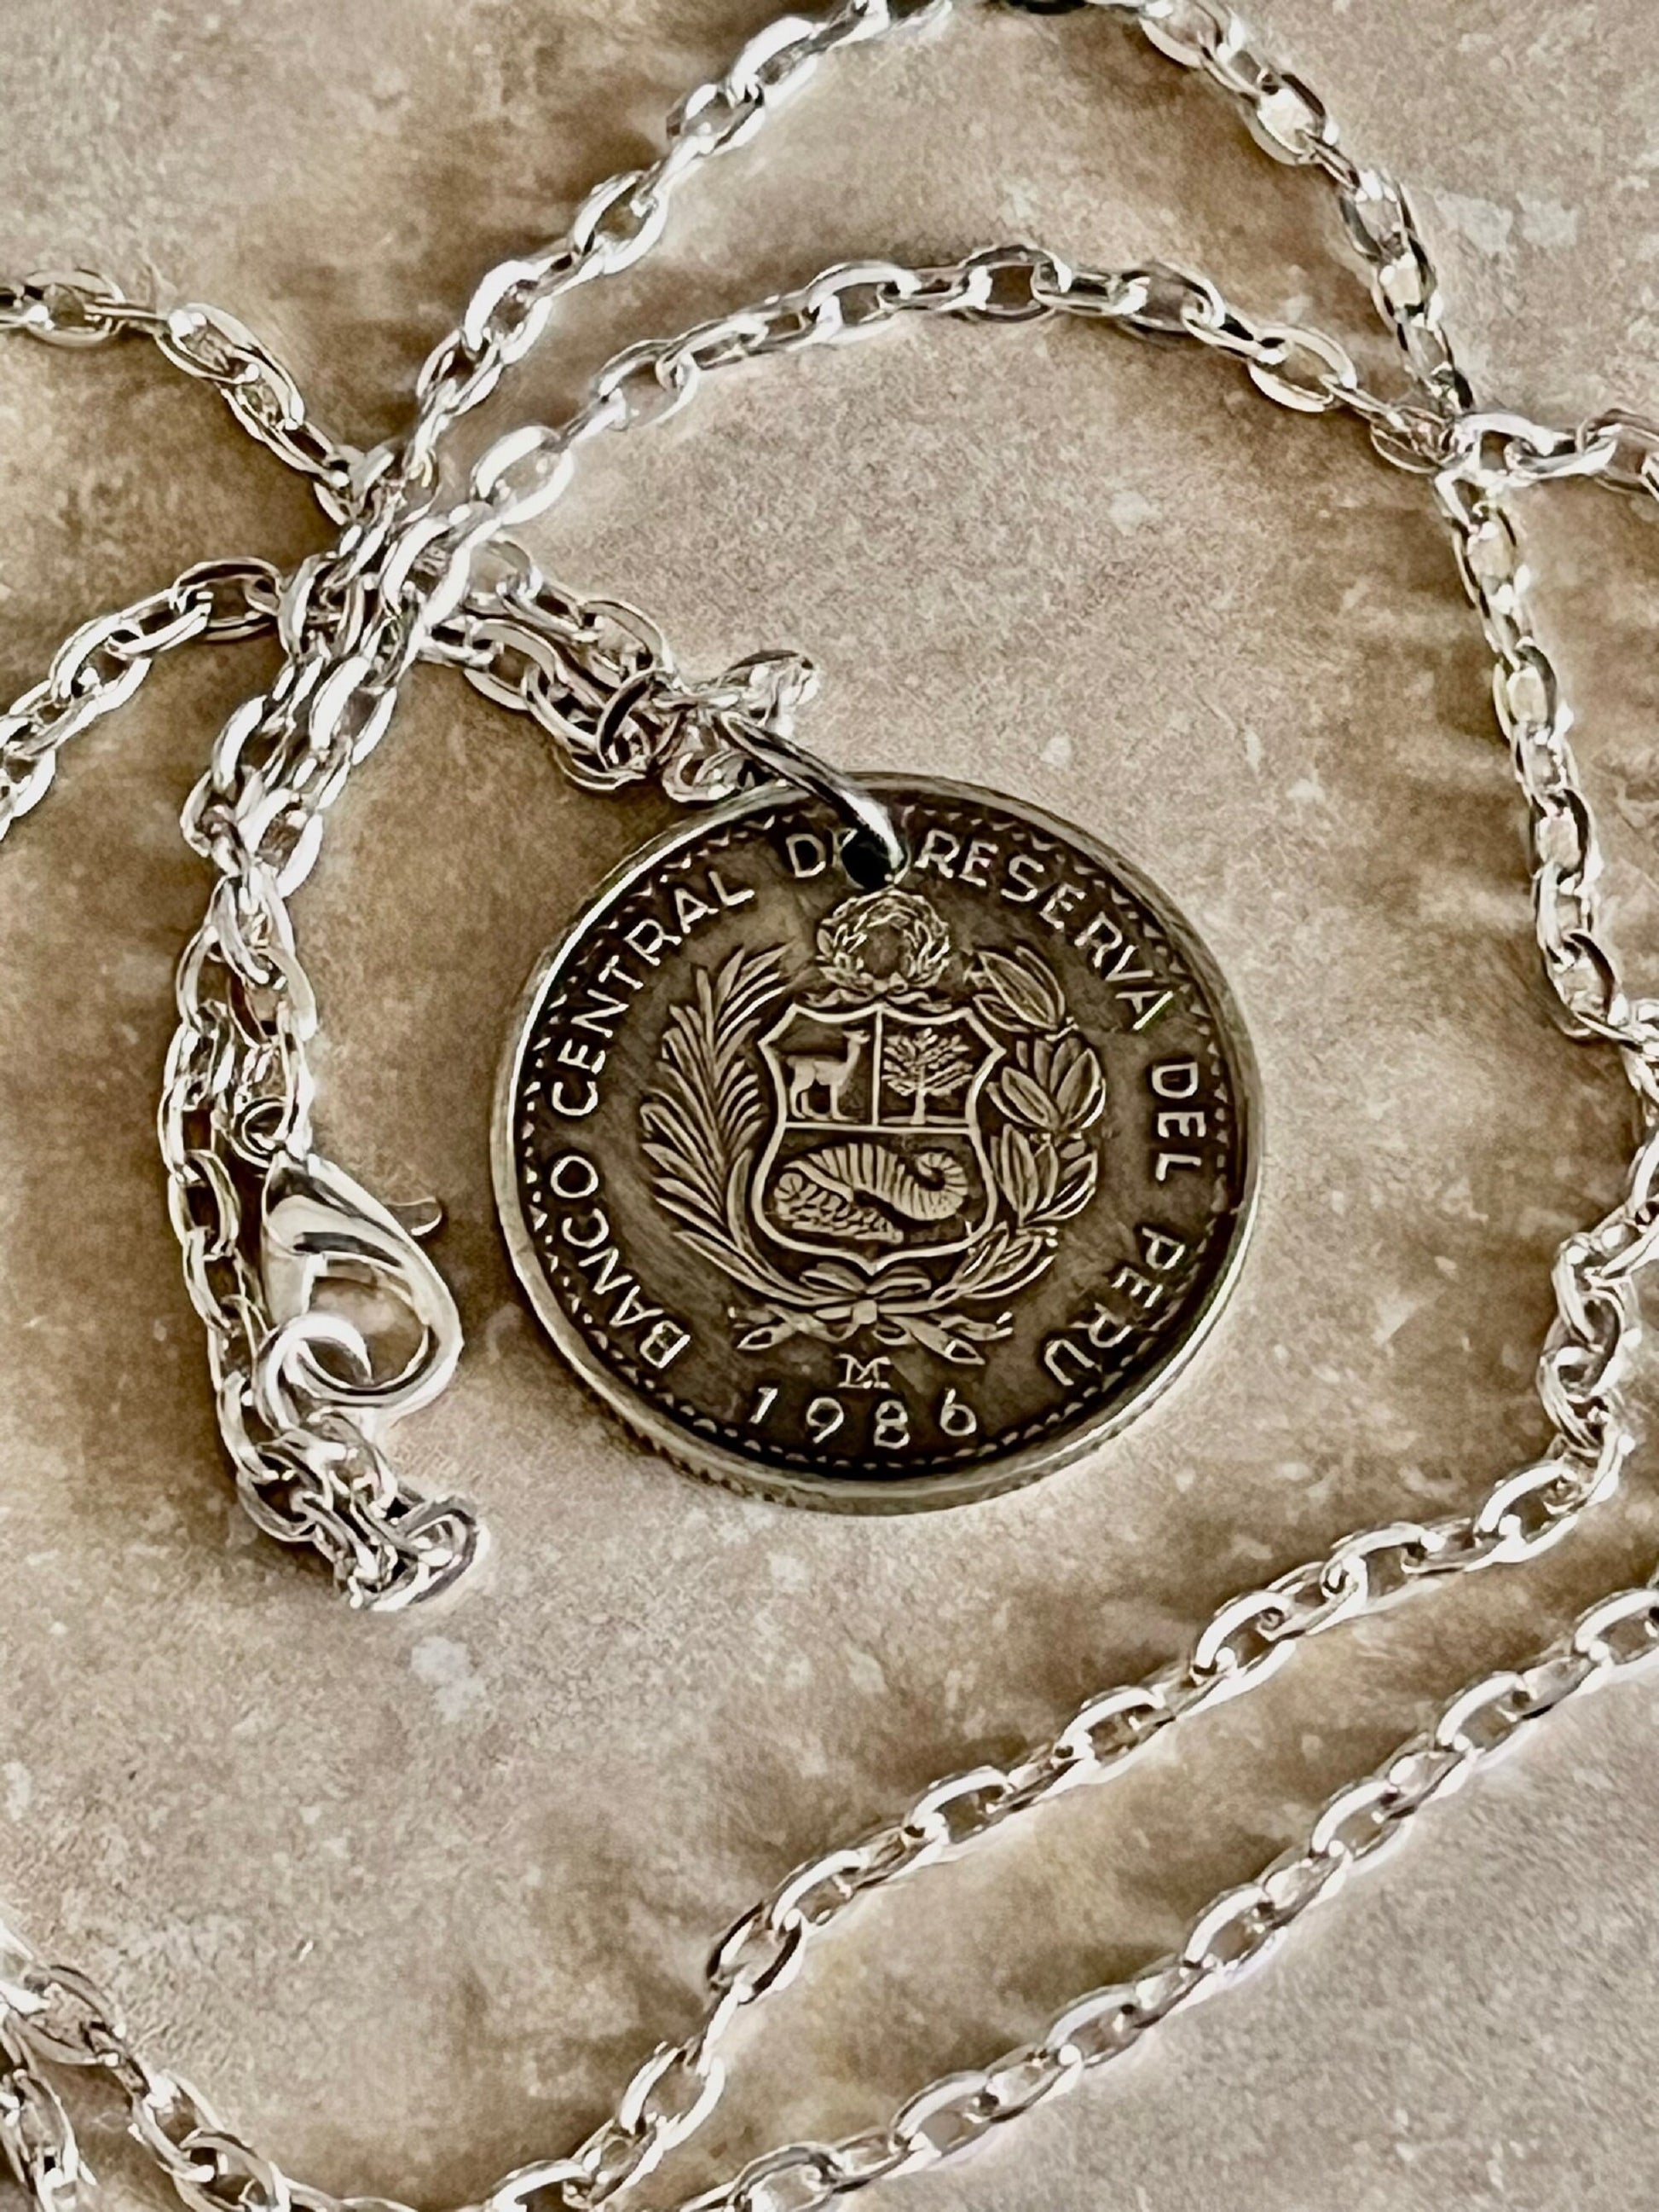 Peru Coin Pendant Peruvian UN Inti Personal Necklace Old Vintage Handmade Jewelry Gift Friend Charm For Him Her World Coin Collector